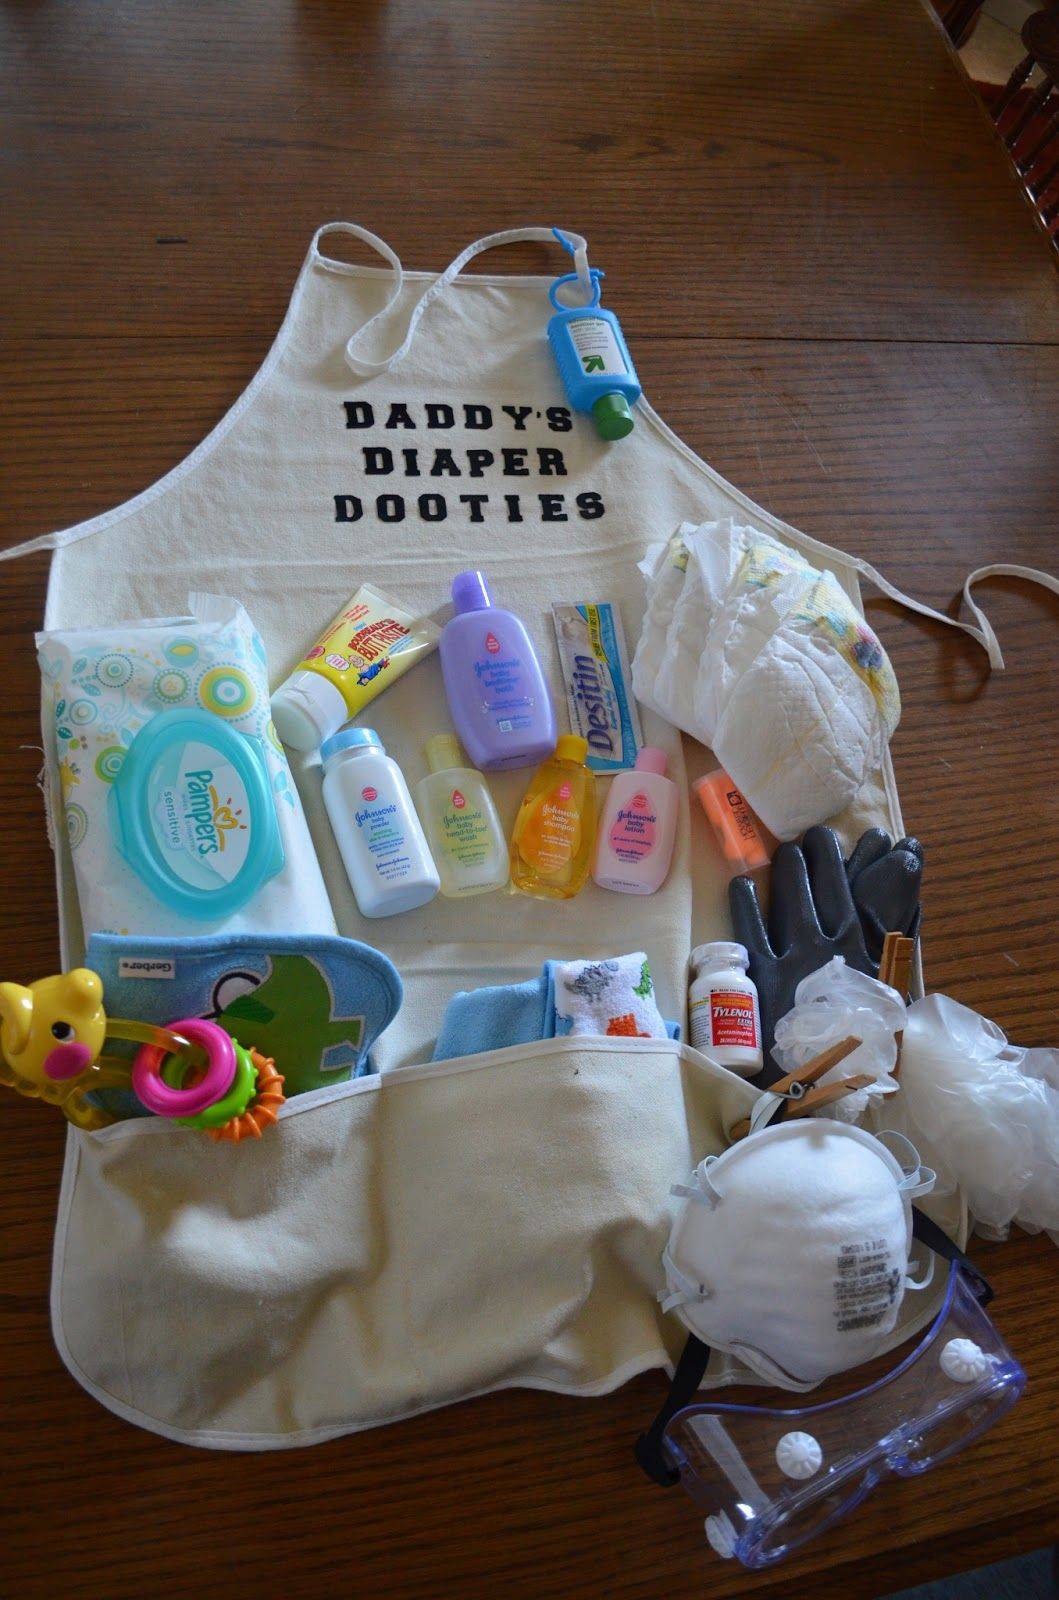 Cute Gift Ideas For Baby Shower
 A diaper apron t Cute for first time dads